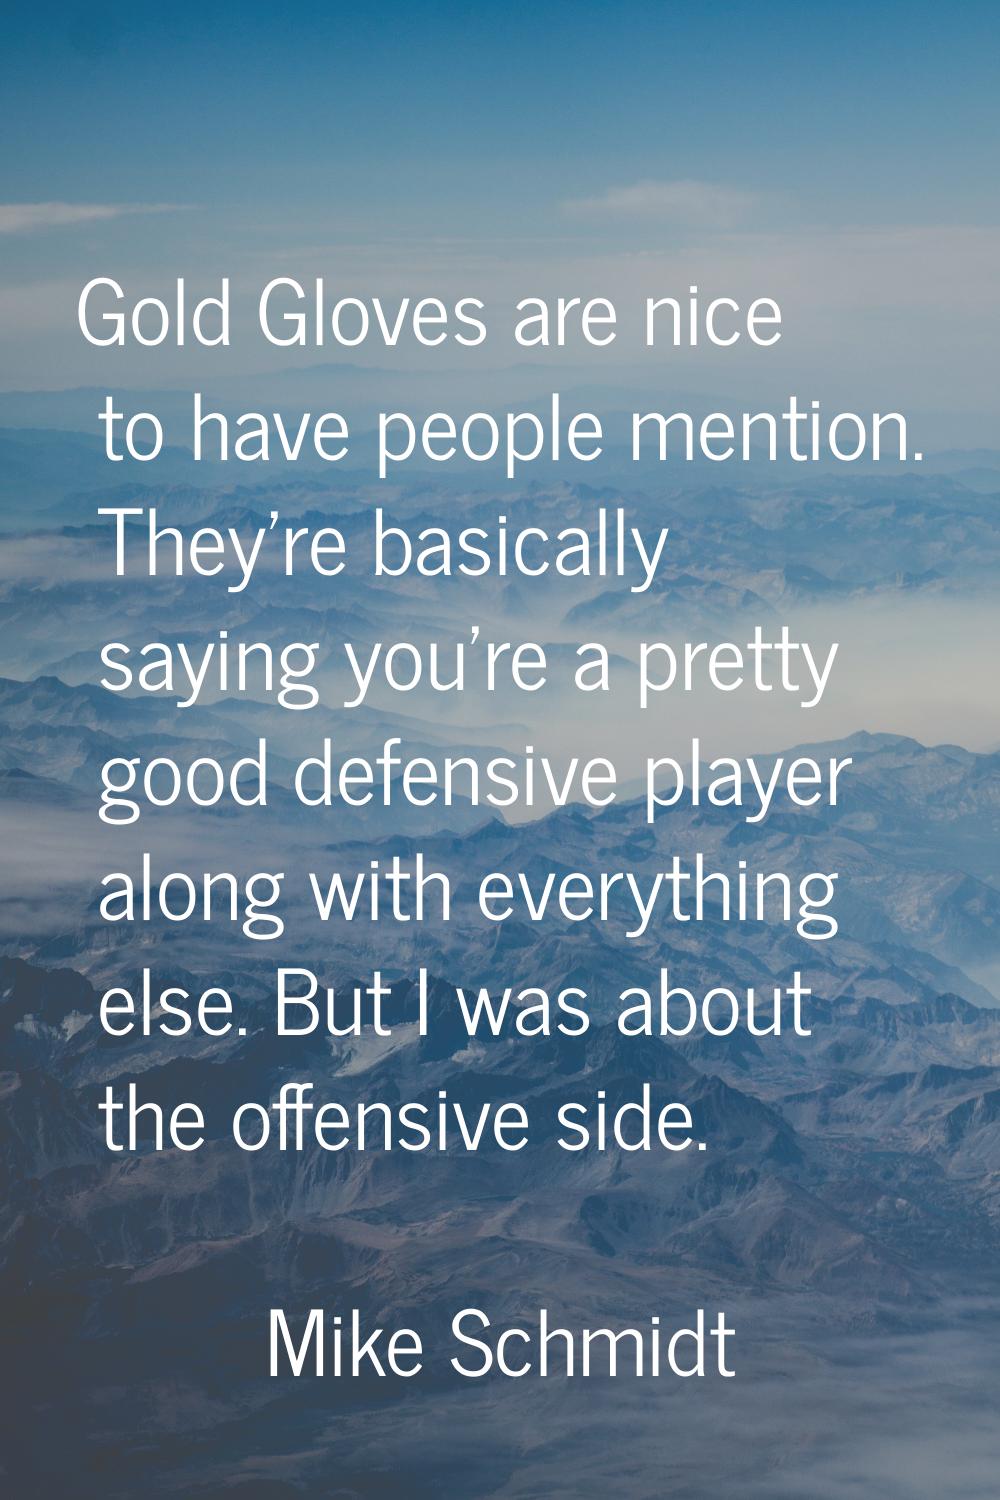 Gold Gloves are nice to have people mention. They're basically saying you're a pretty good defensiv